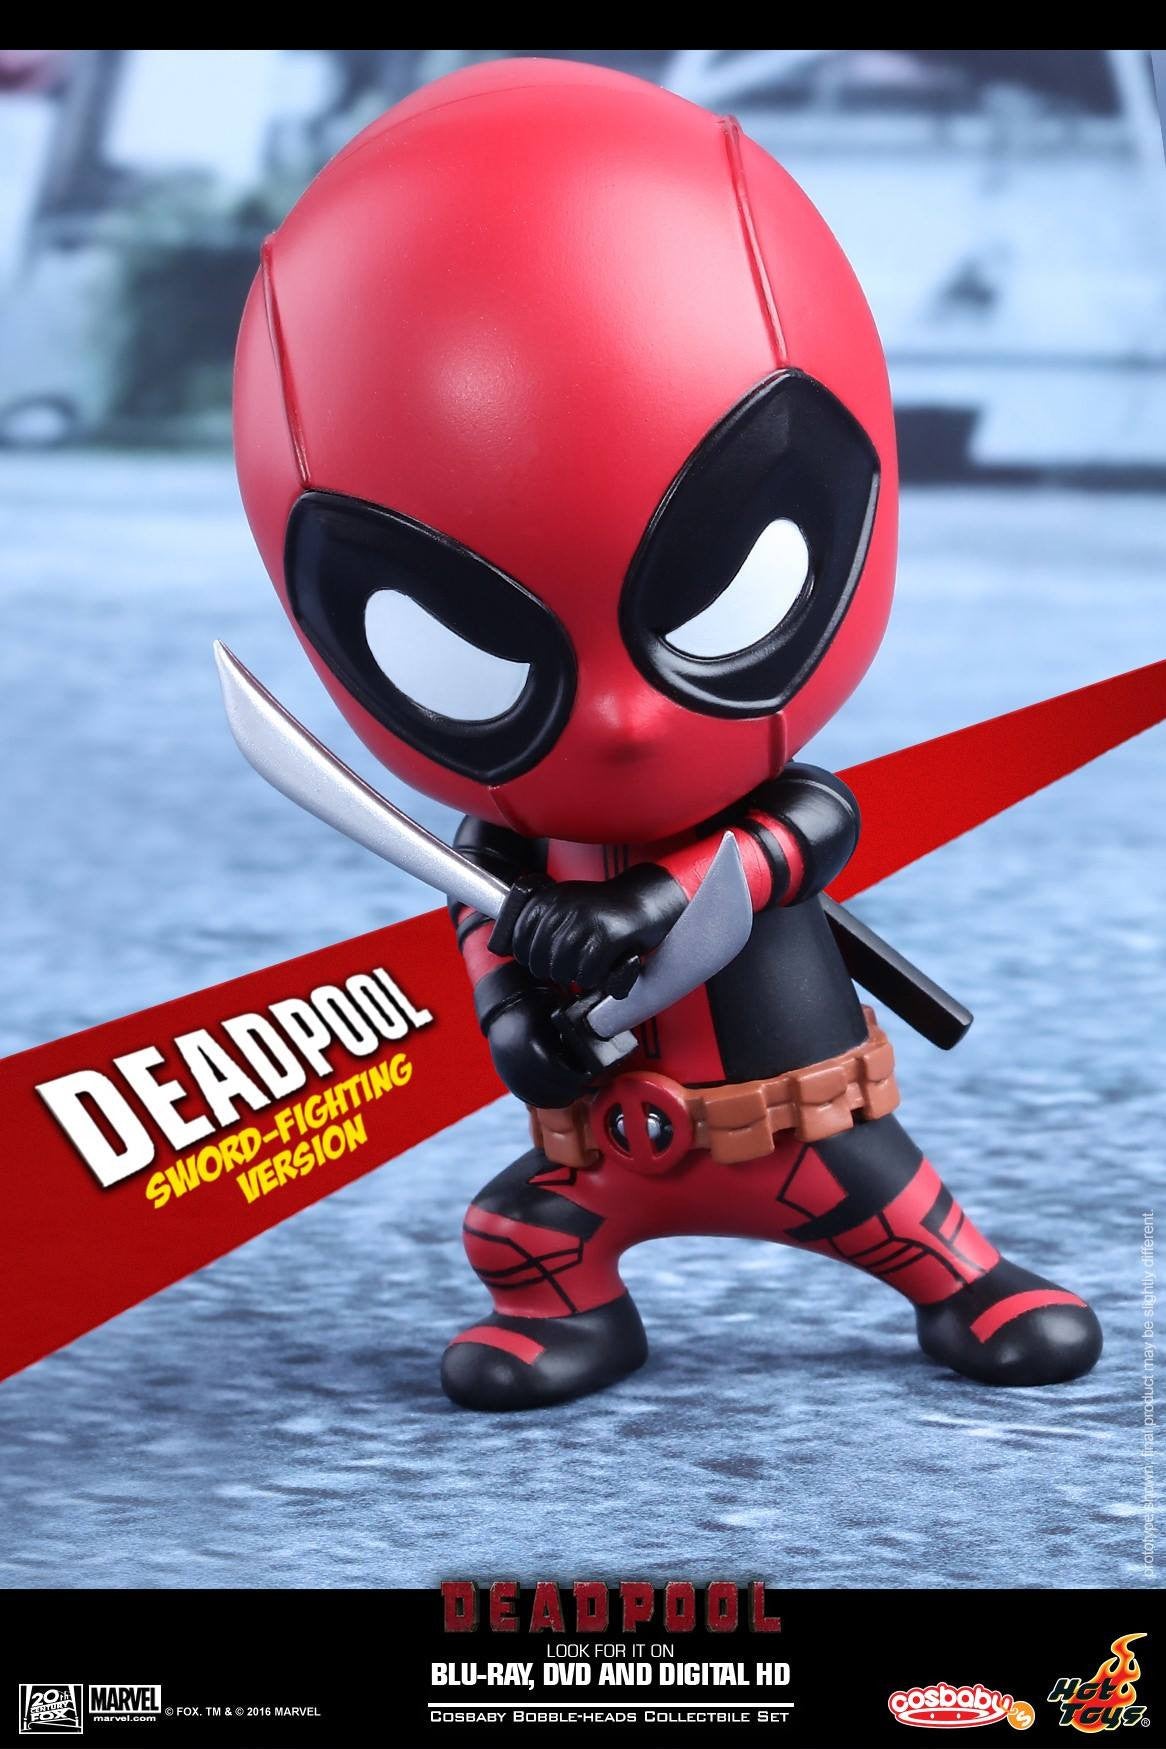 Hot Toys - COSB220 - Deadpool (Sword-Fighting Version) Cosbaby Bobble-Head - Marvelous Toys